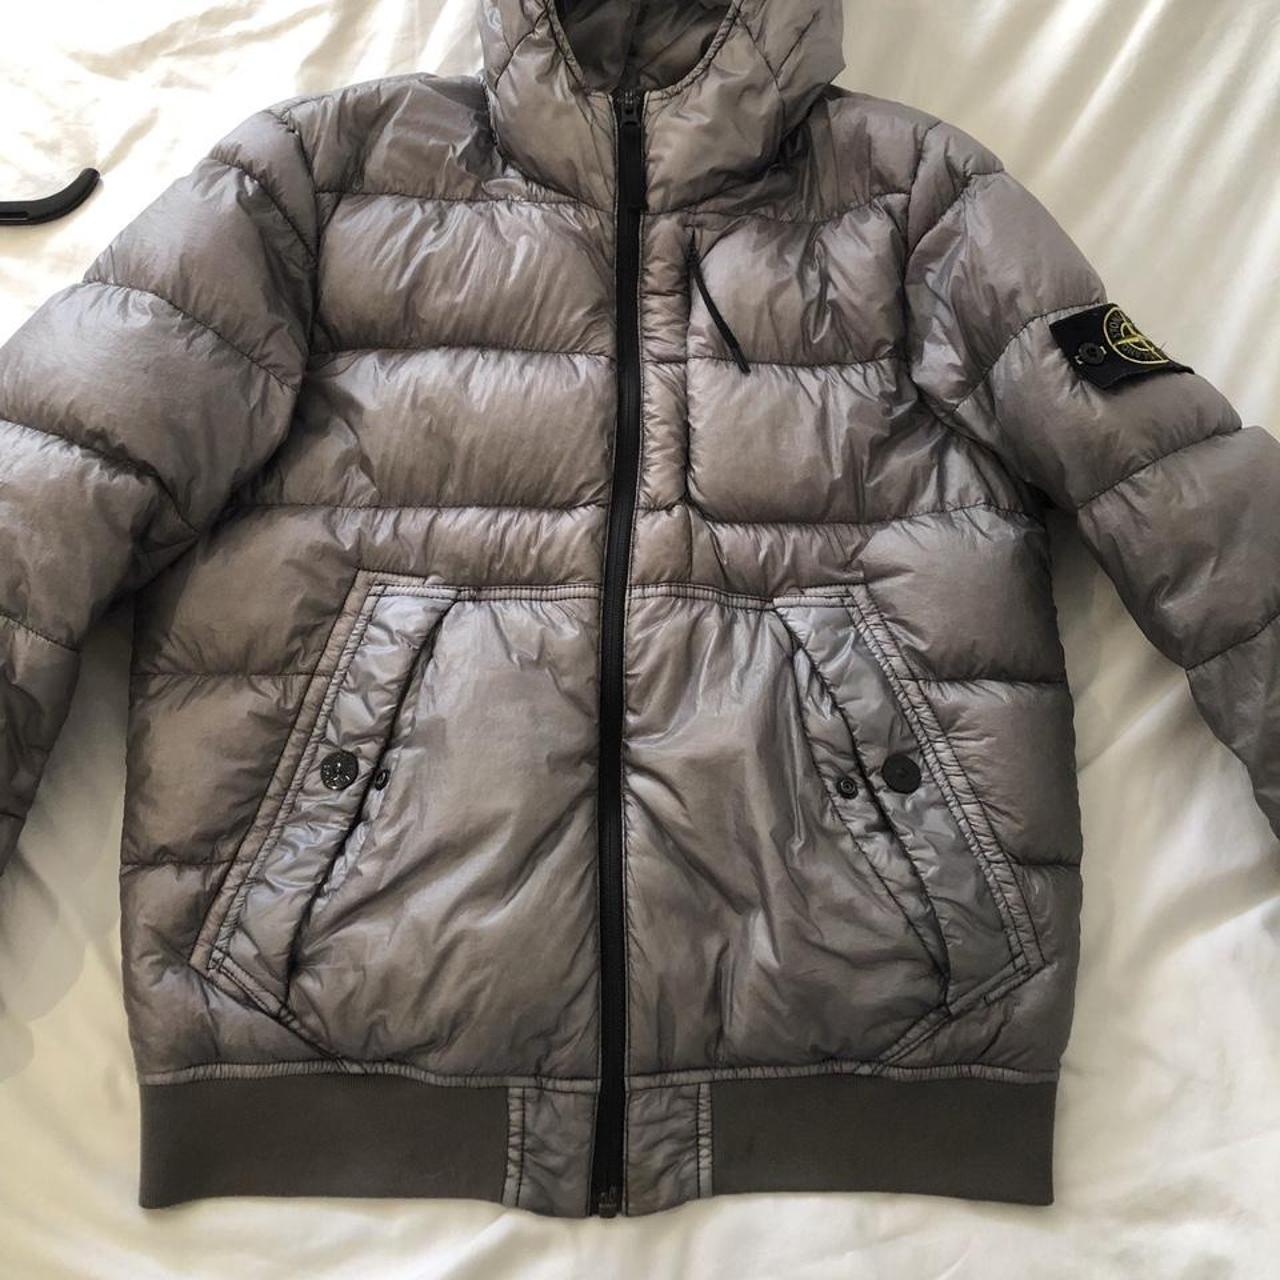 Stone island puffer coat. 7/10 condition, two small... - Depop